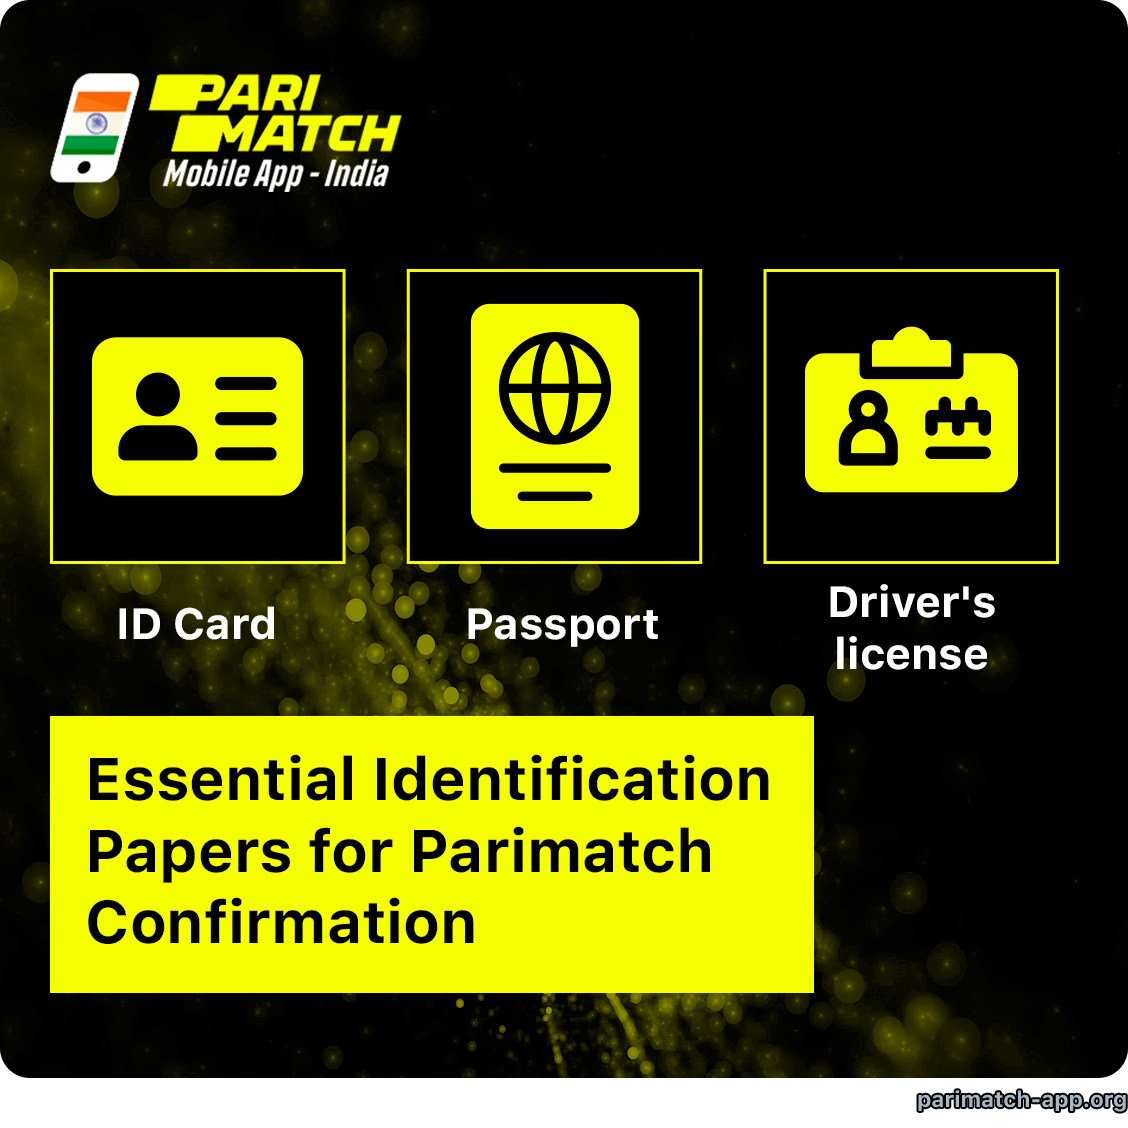 Indian Players of Parimatch App can use passport, driving license or ID Card for account verification